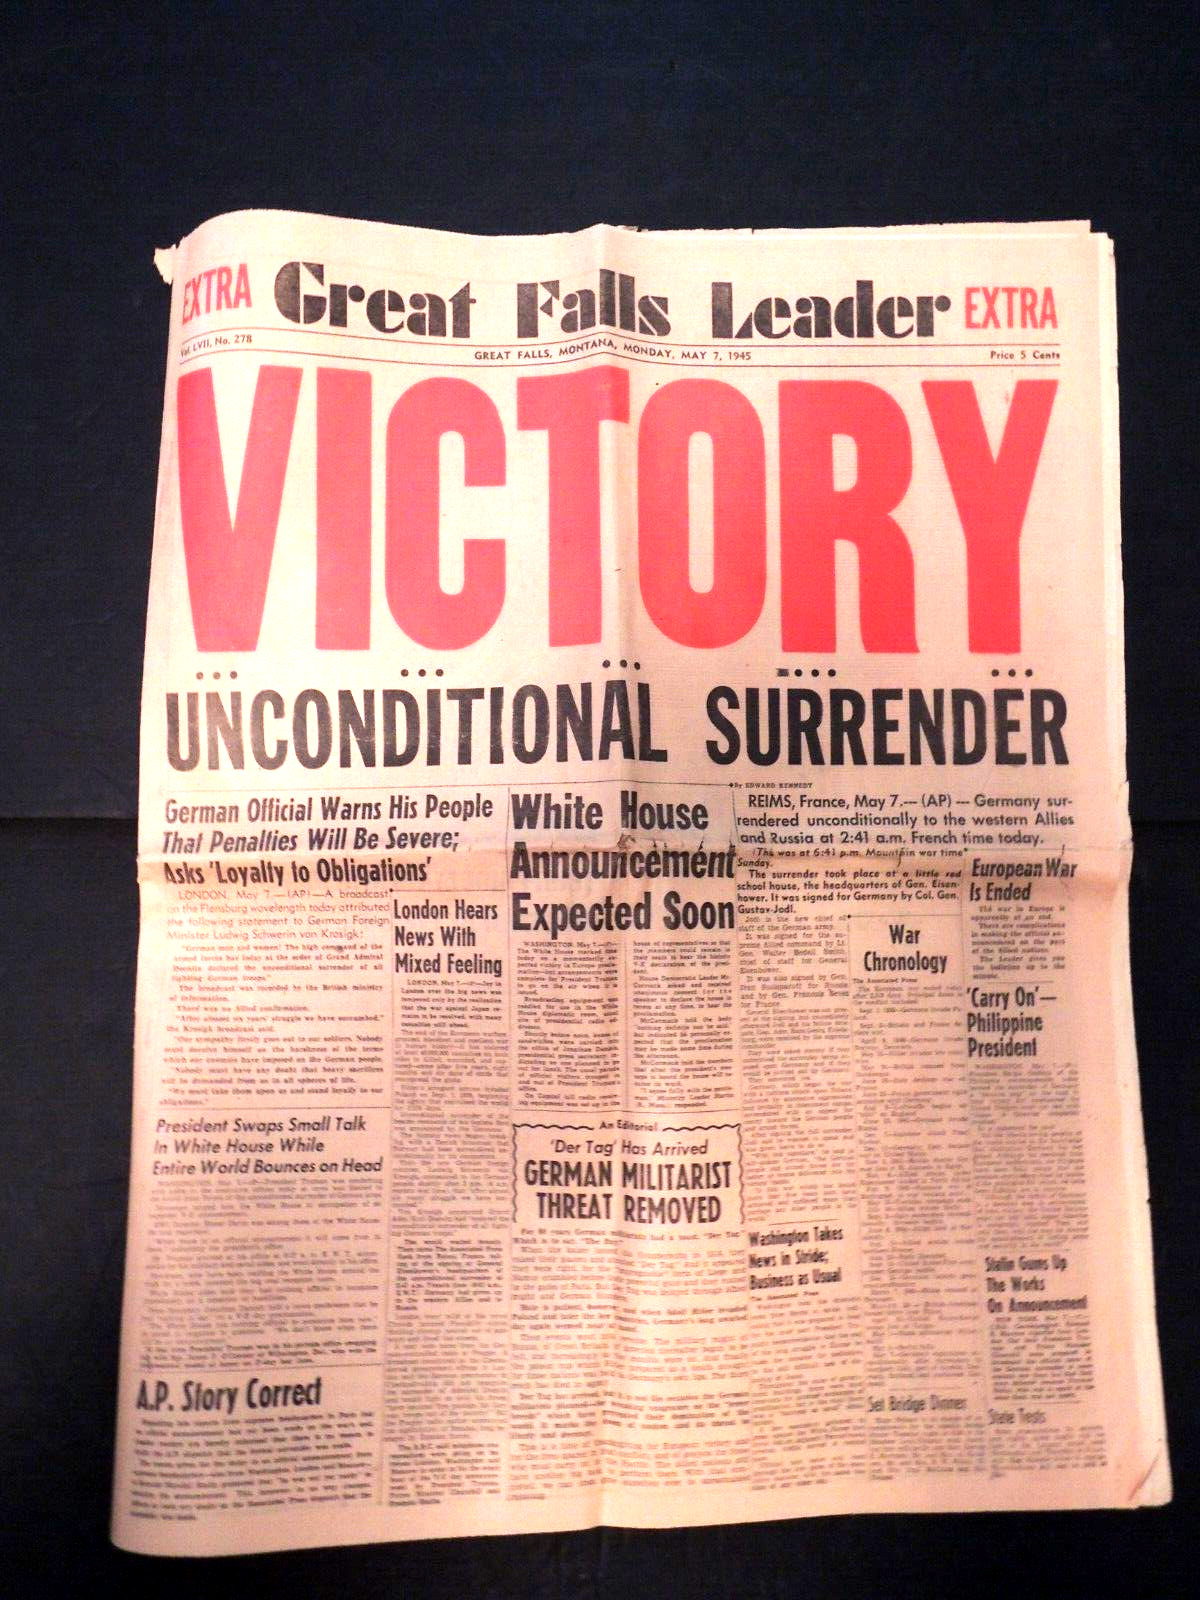 Germany Surrenders Victory in Europe May 1945 Great Falls MT Paper Red Headline